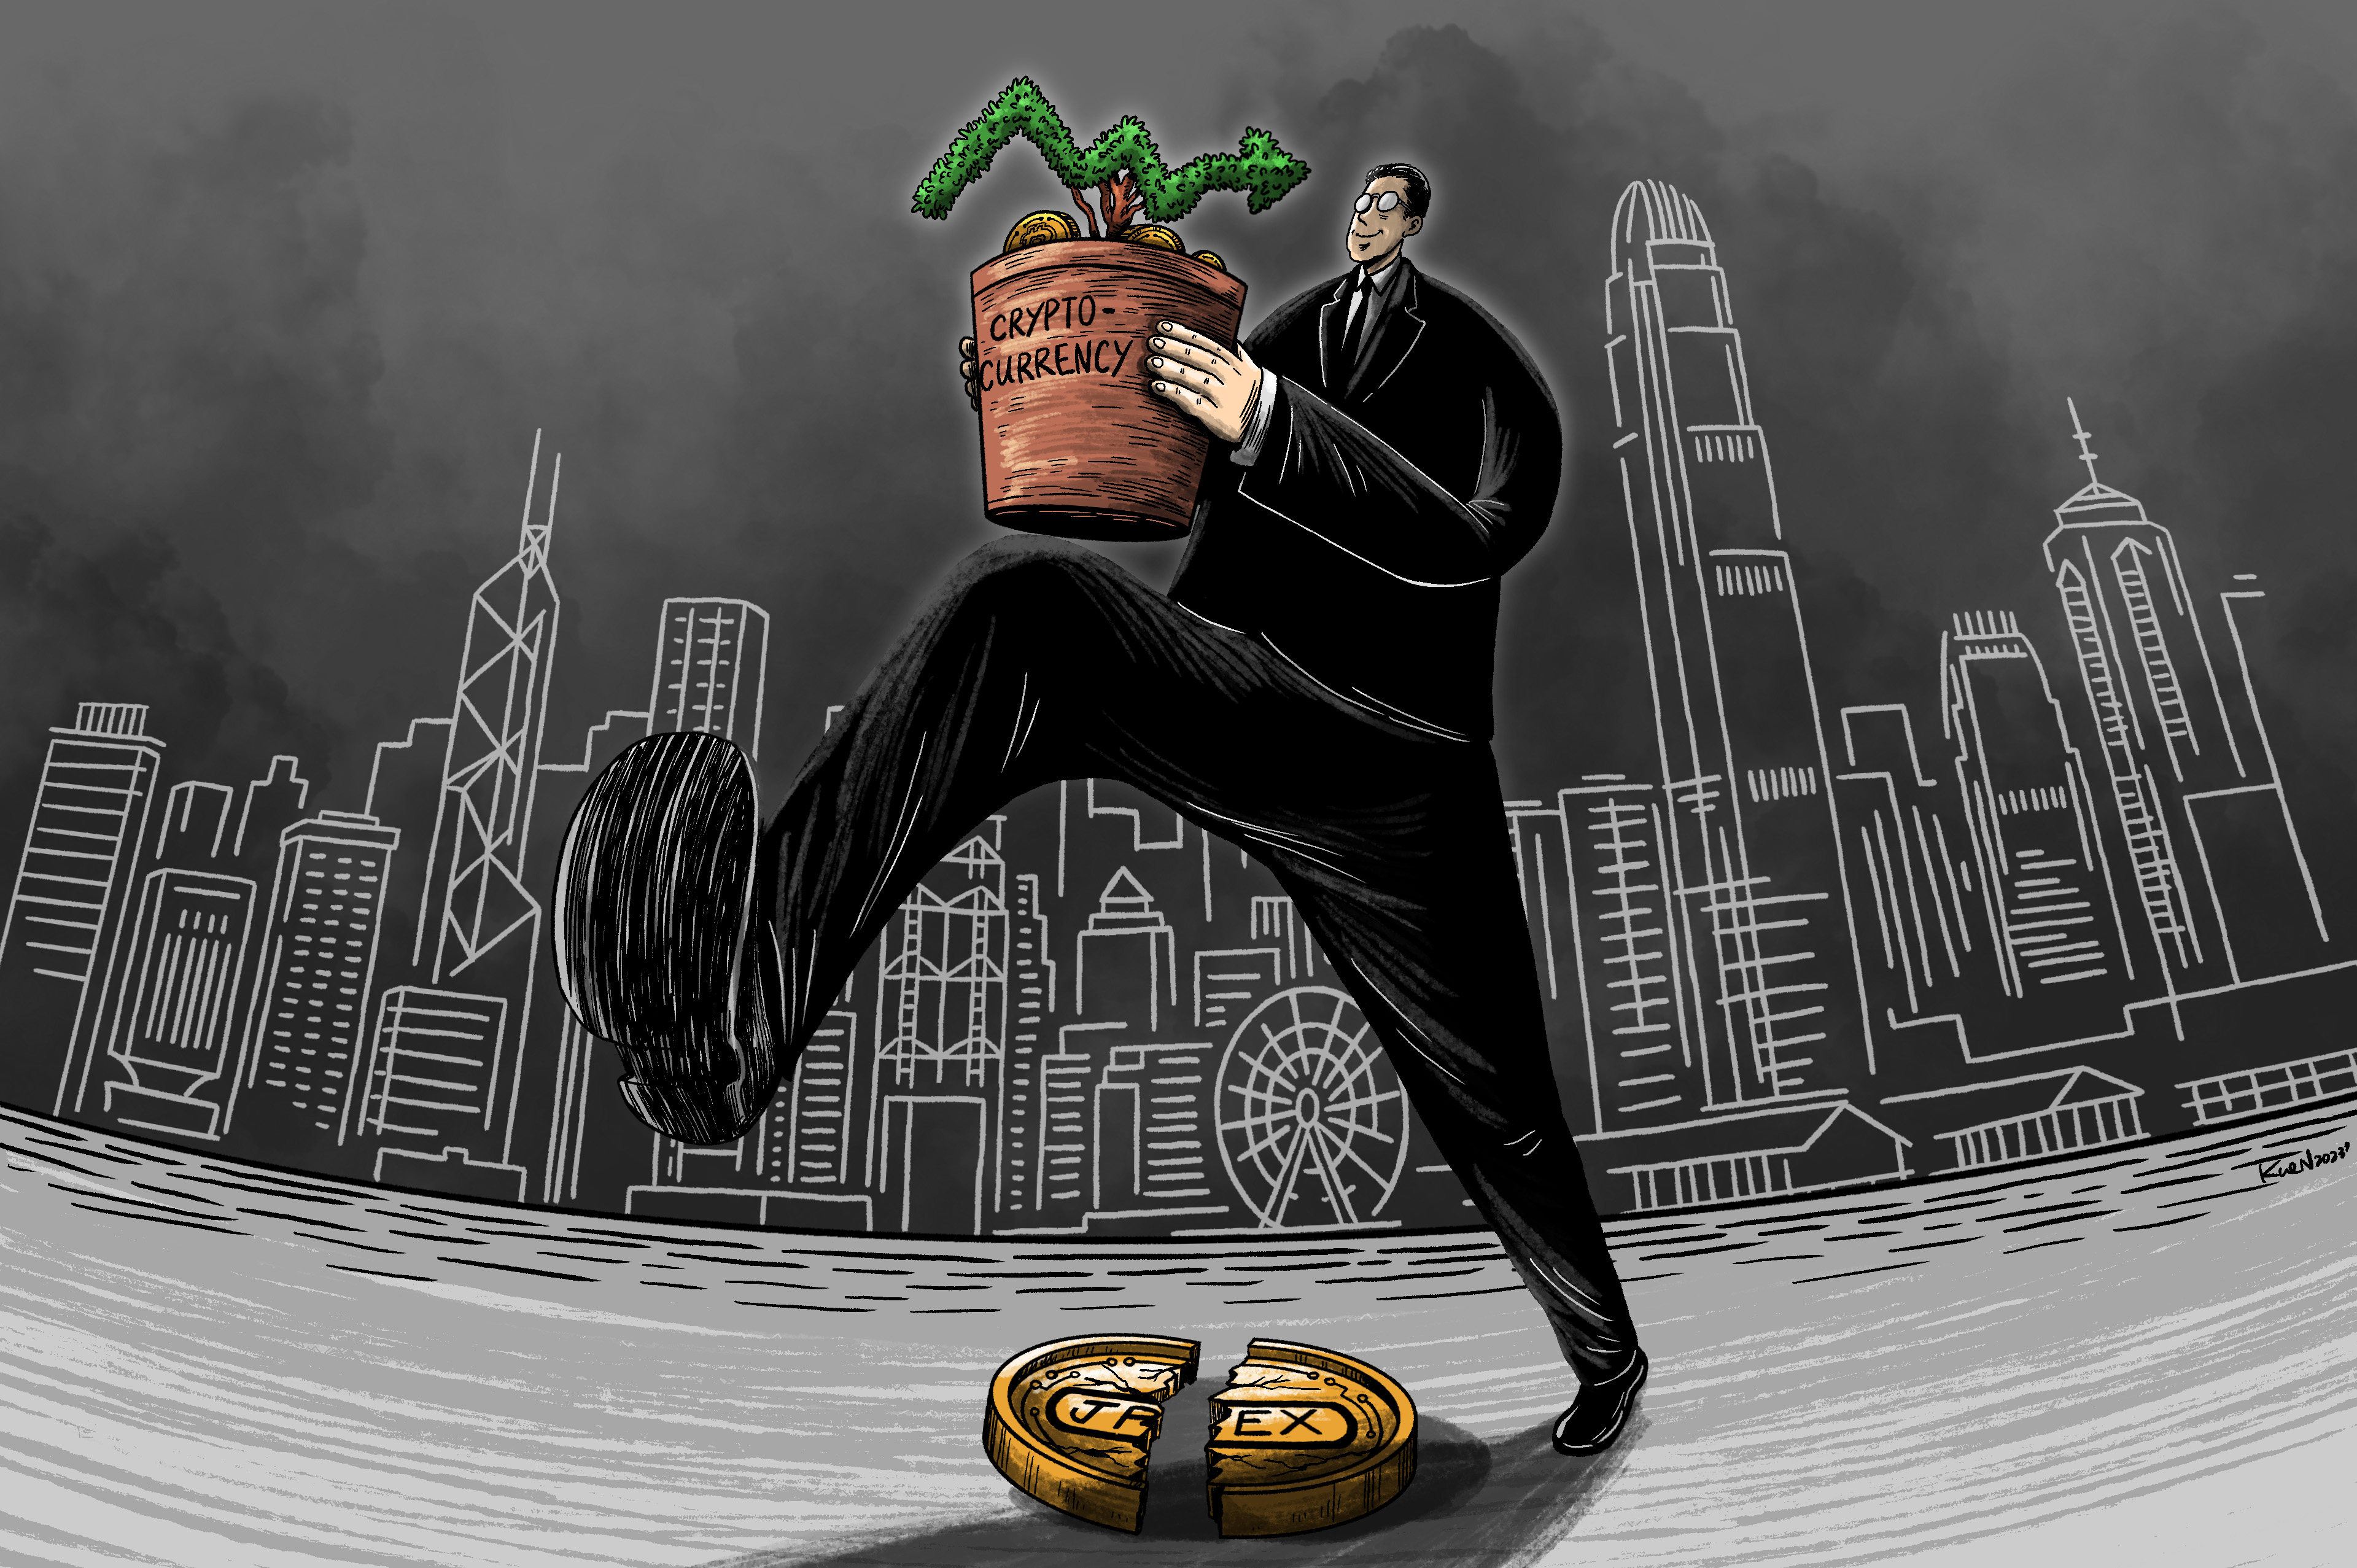 Hong Kong has big dreams for its cryptocurrency and Web3 industry, but a new regulatory regime is off to a slow start as the city struggles to attract foreign business. Illustration: Lau Ka-kuen